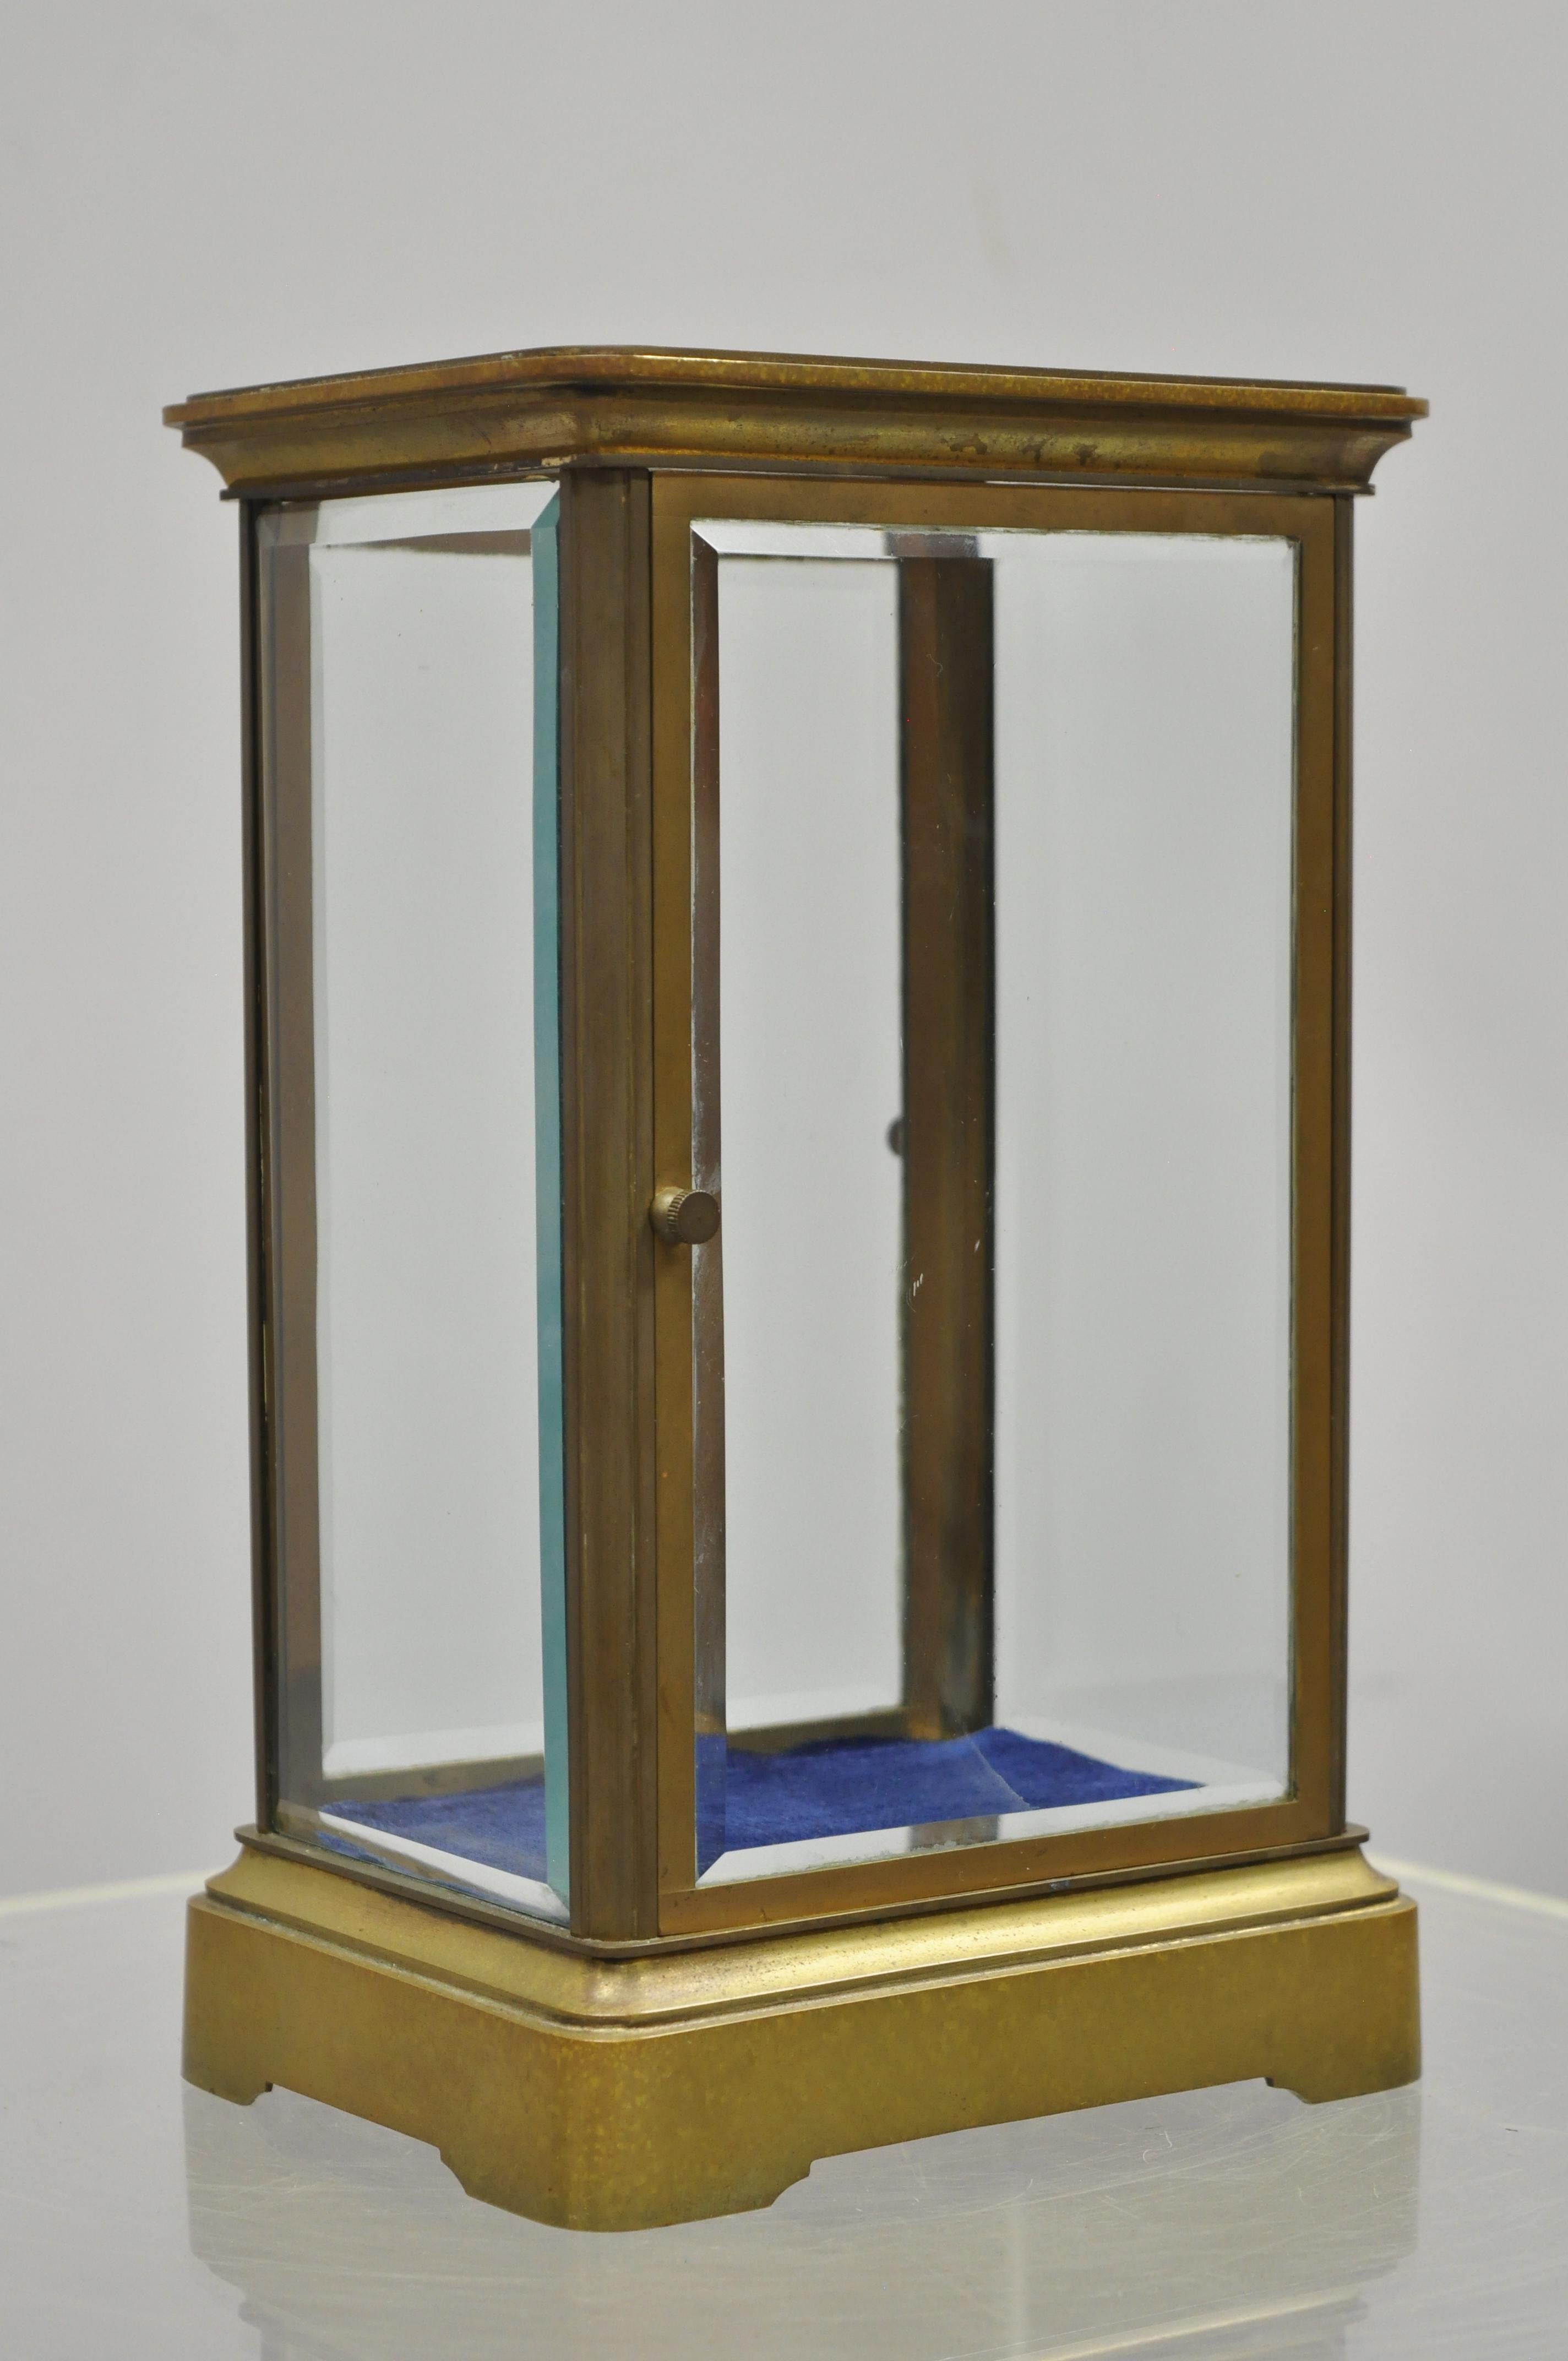 Antique French brass bronze glass small carriage clock mini figure display case. Item features double door entry, beveled glass panels, removable blue fabric liner, solid brass construction, remarkable quality and craftsmanship, circa early 20th